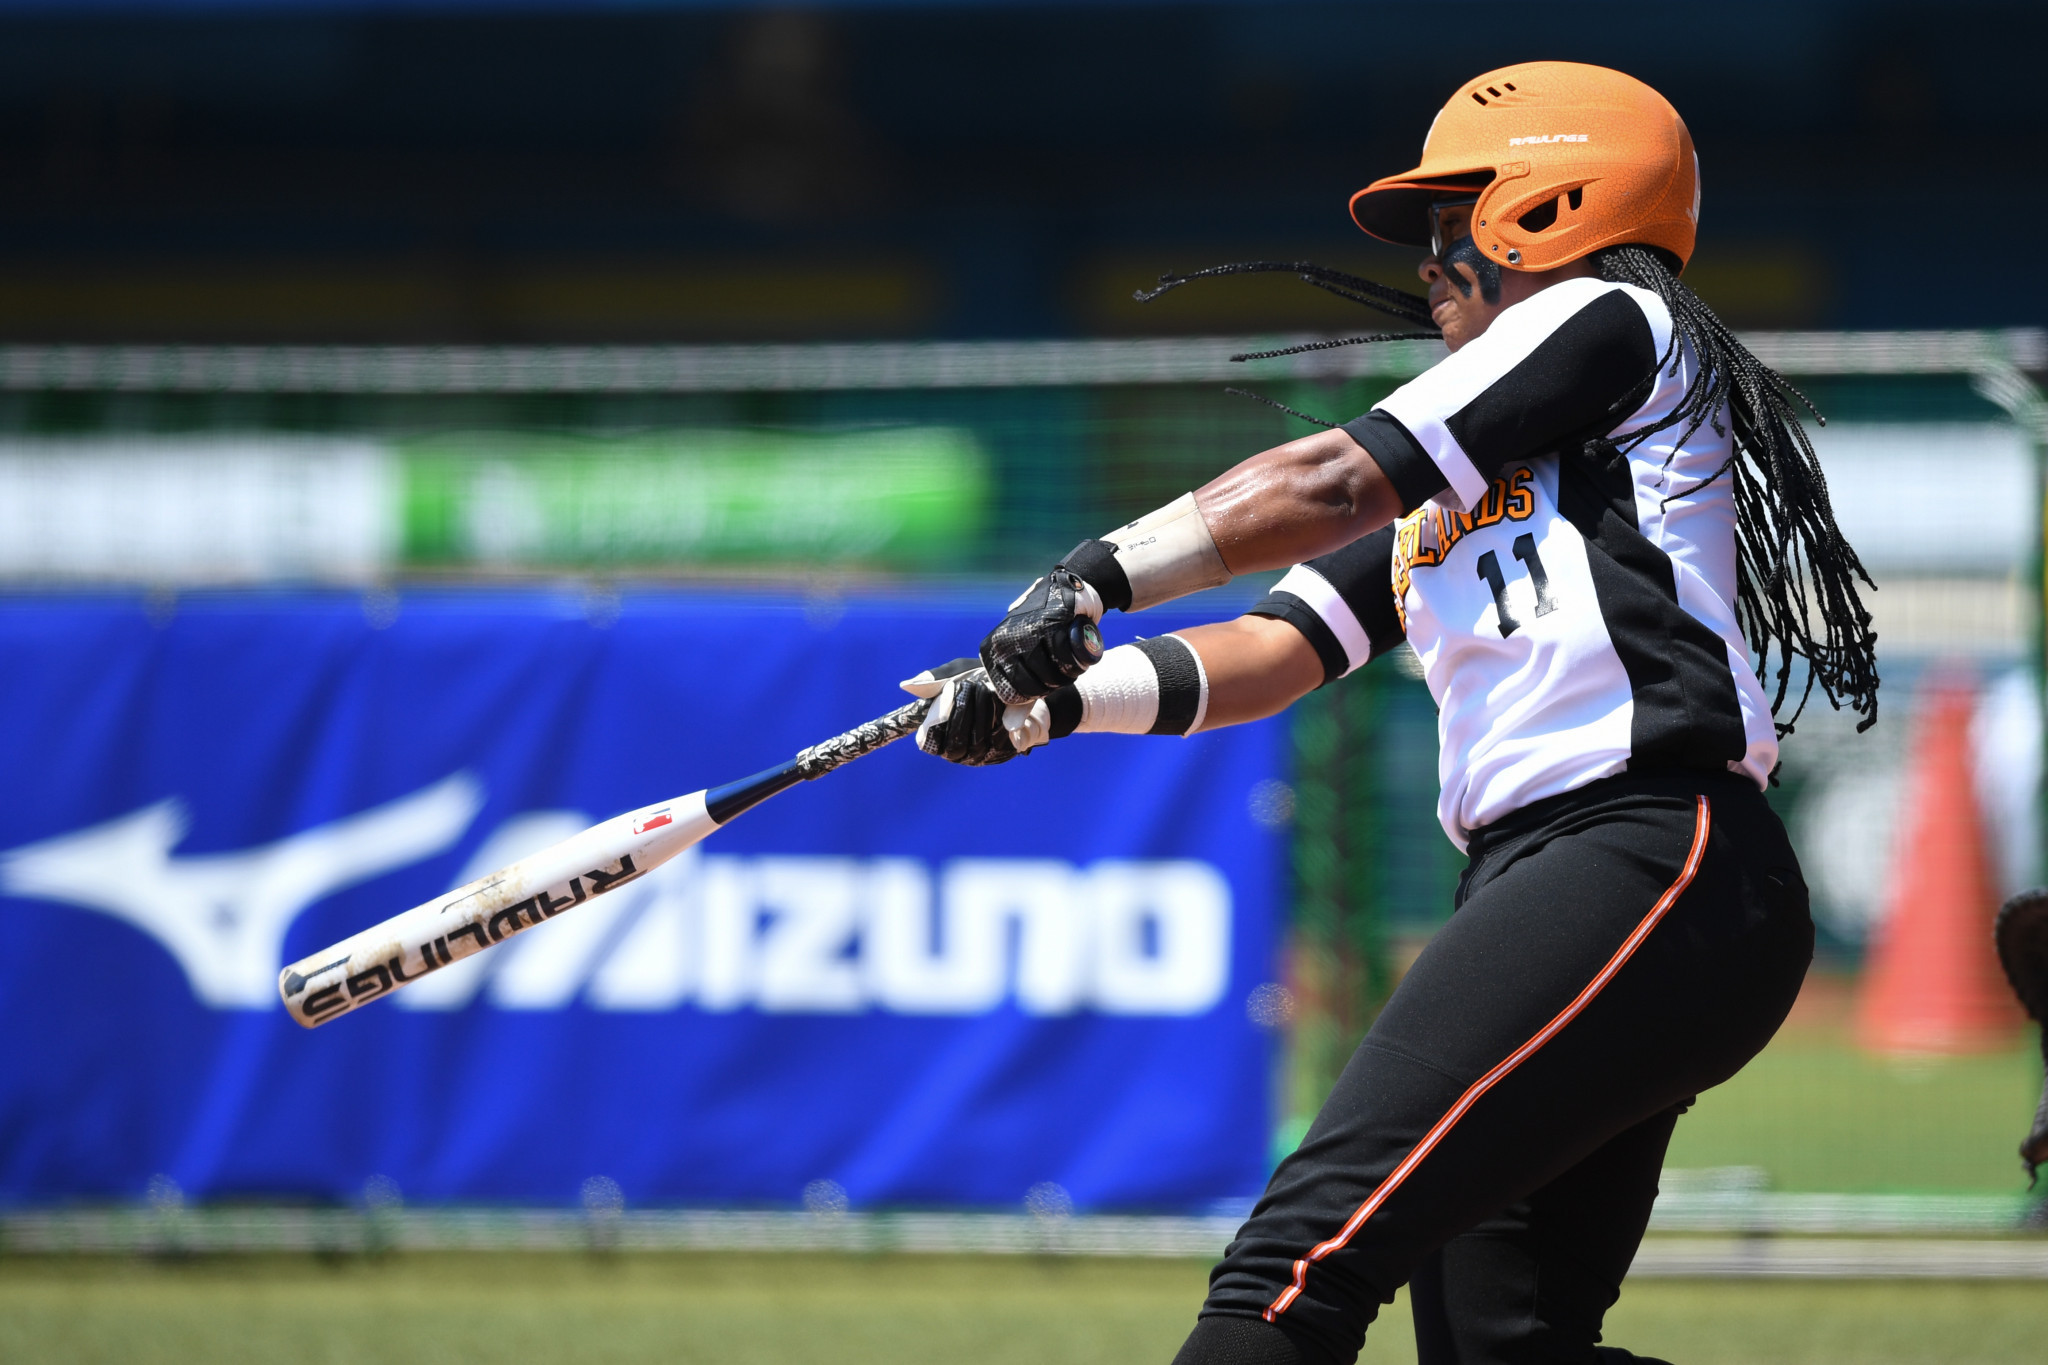 The Netherlands are the defending champions of the 2019 Softball Women’s European Championship ©Getty Images